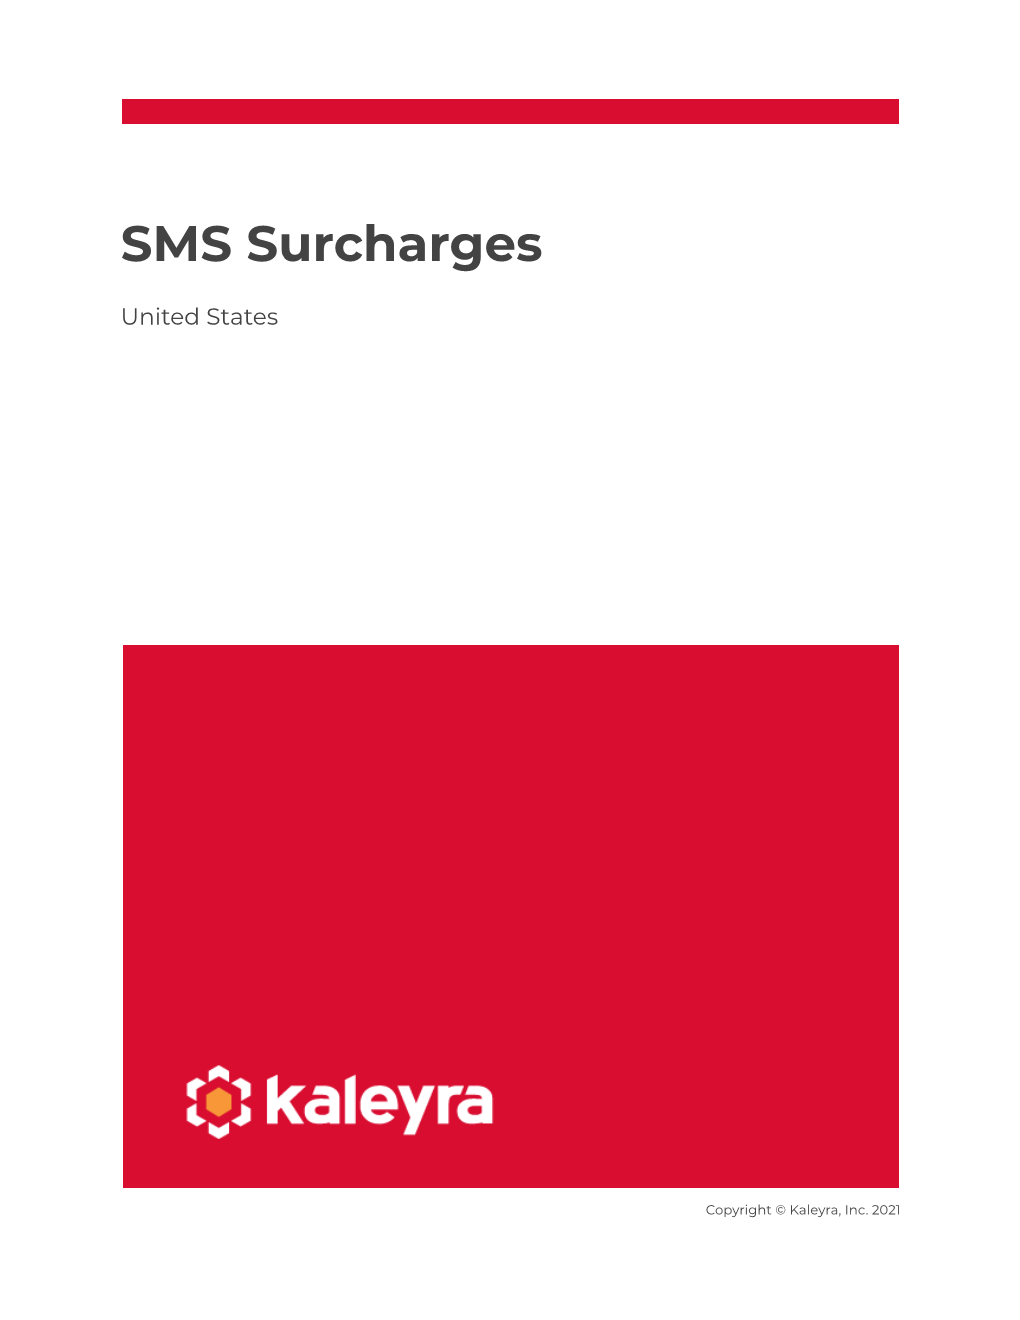 SMS Surcharges